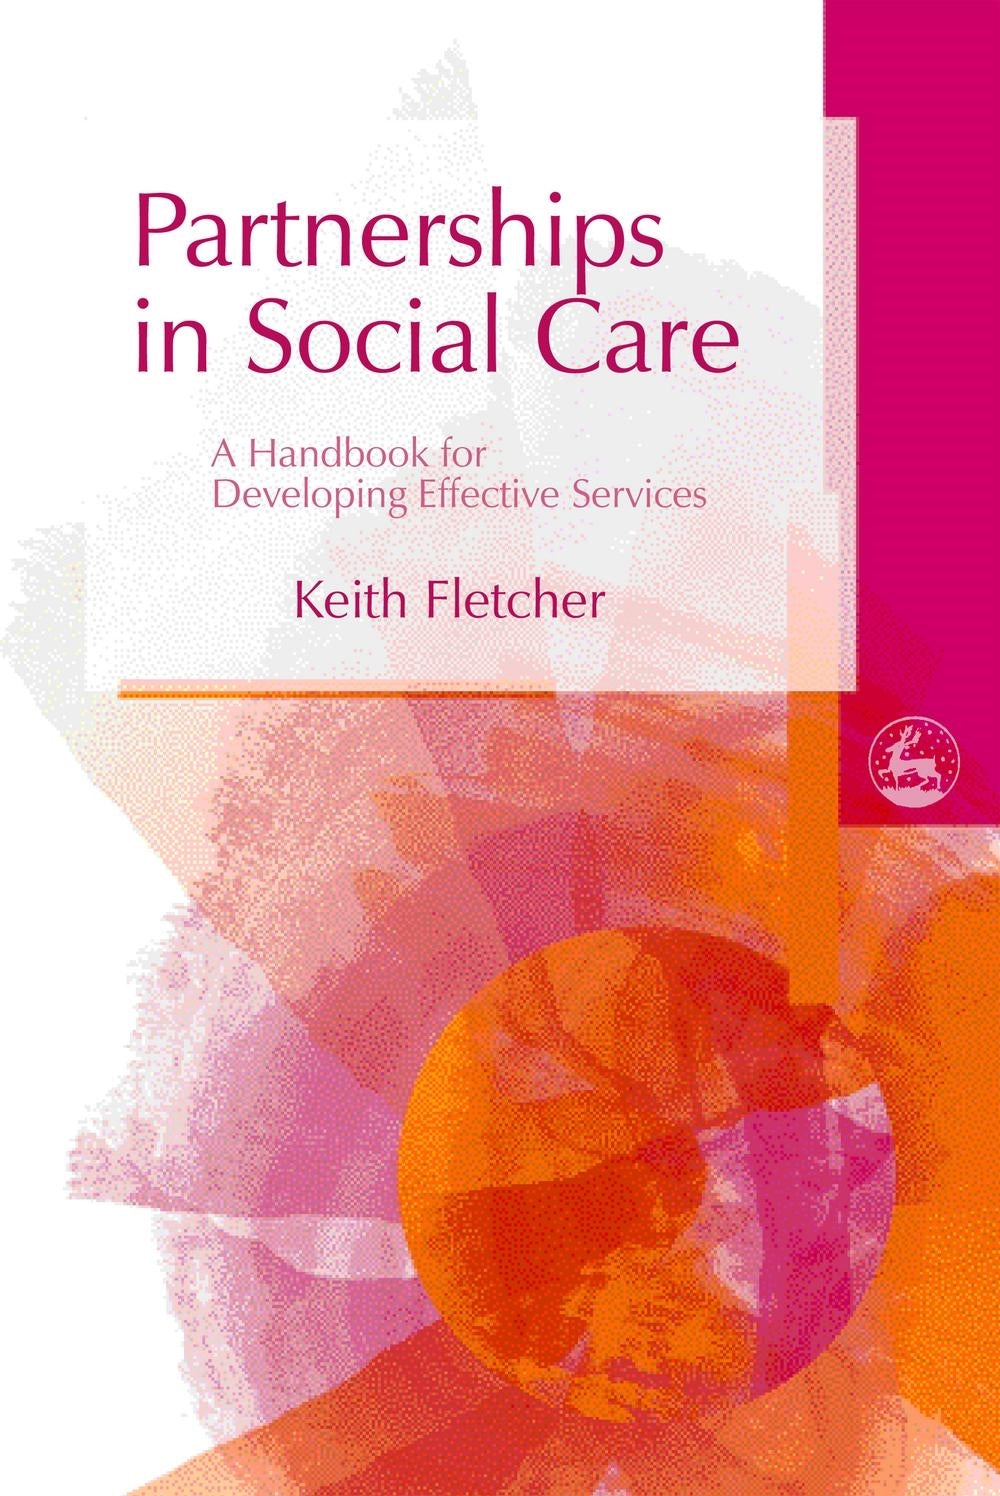 Partnerships in Social Care by Keith Fletcher